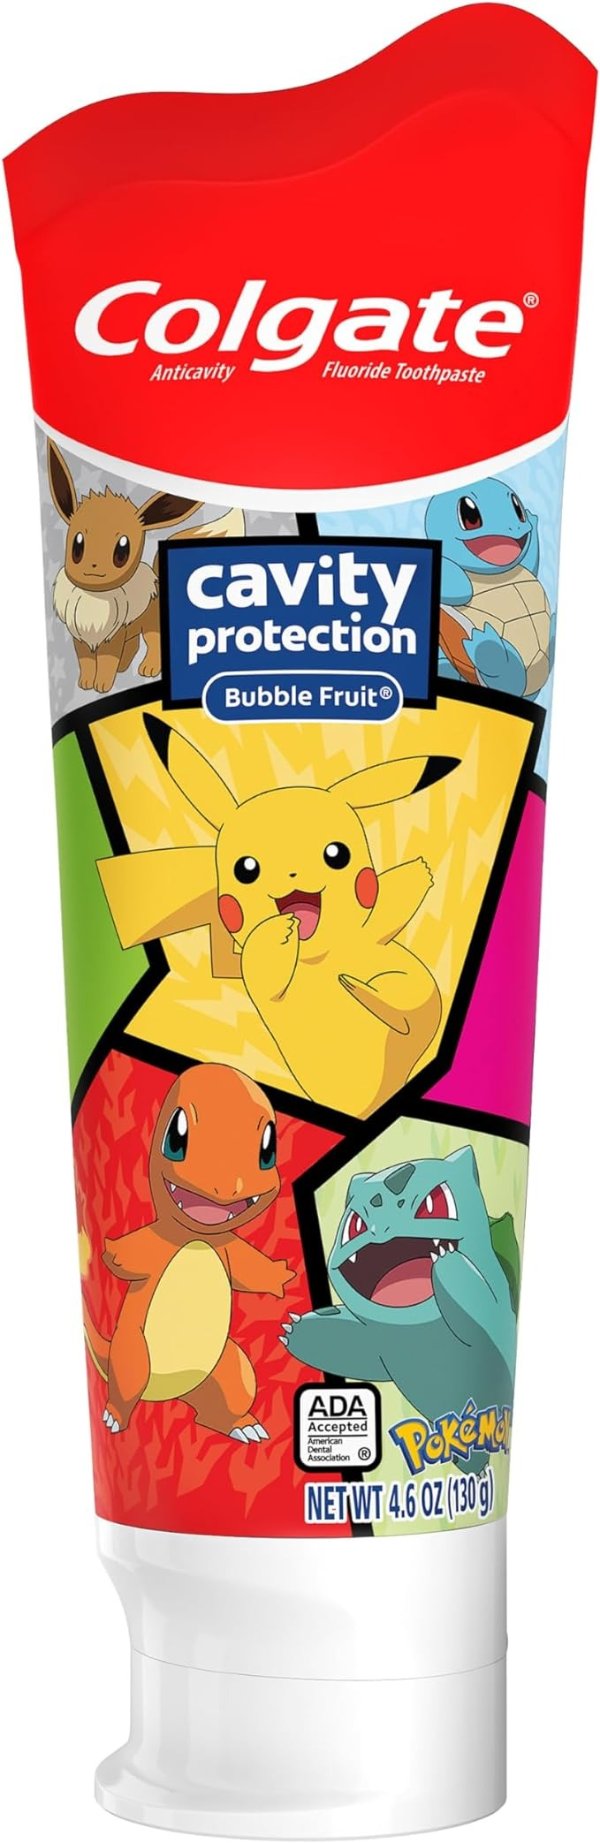 Kids Cavity Protection Toothpaste, Pokemon Kids Toothpaste with Fluoride, Helps Fight Cavities, Safe for Ages 2+, Mild Bubble Fruit Flavor, Sugar Free, Kids Fluoride Toothpaste, 4.6 Oz Tube